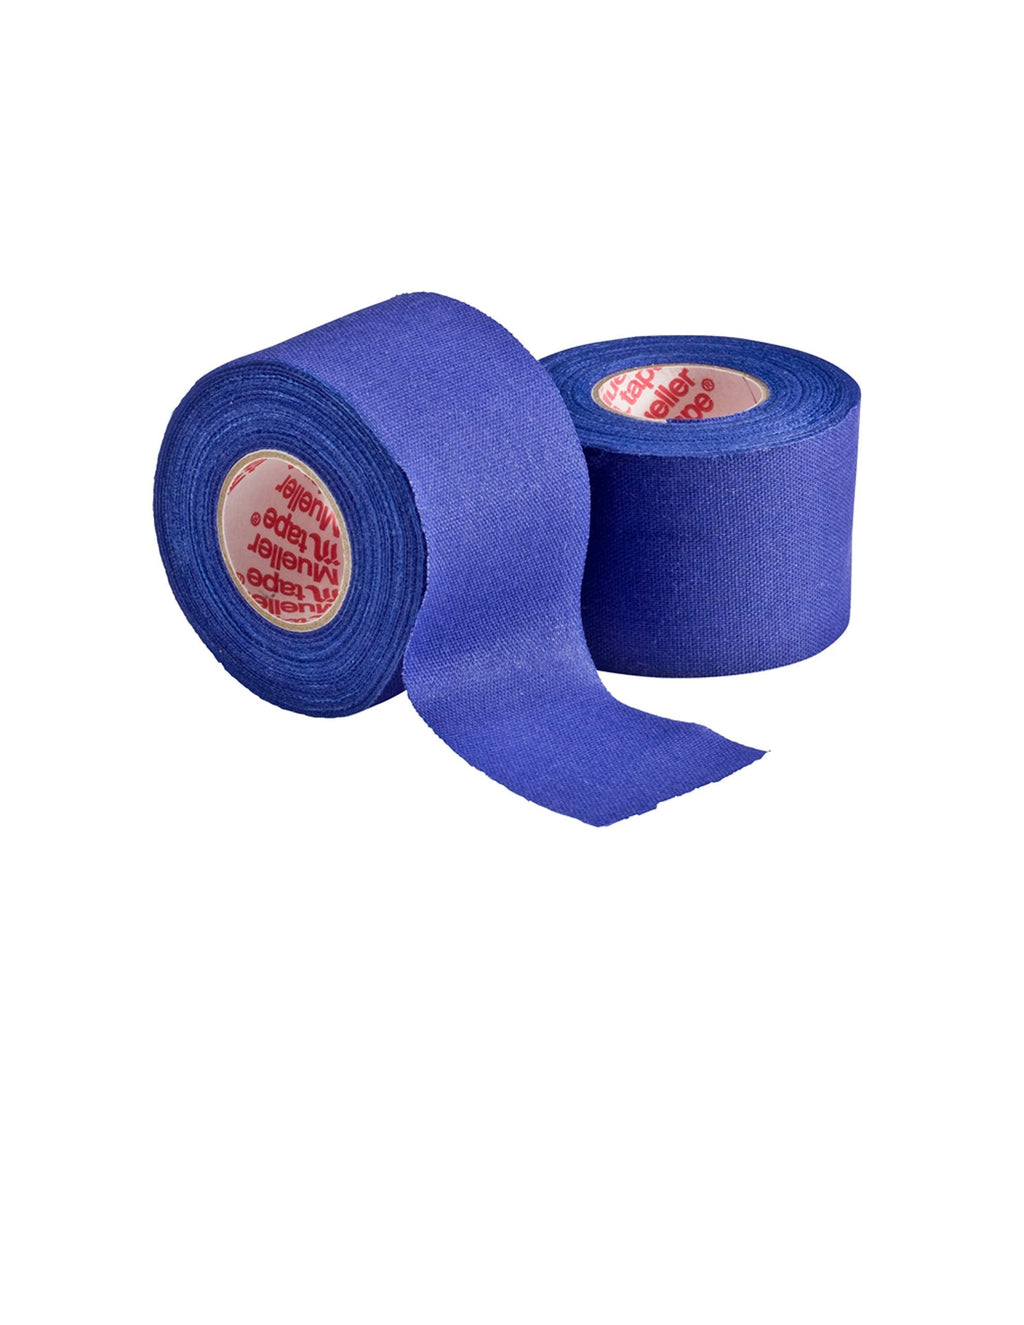 Mueller Athletic Tape, 1.5" X 10yd Roll, Royal Blue, 2 pack - BeesActive Australia